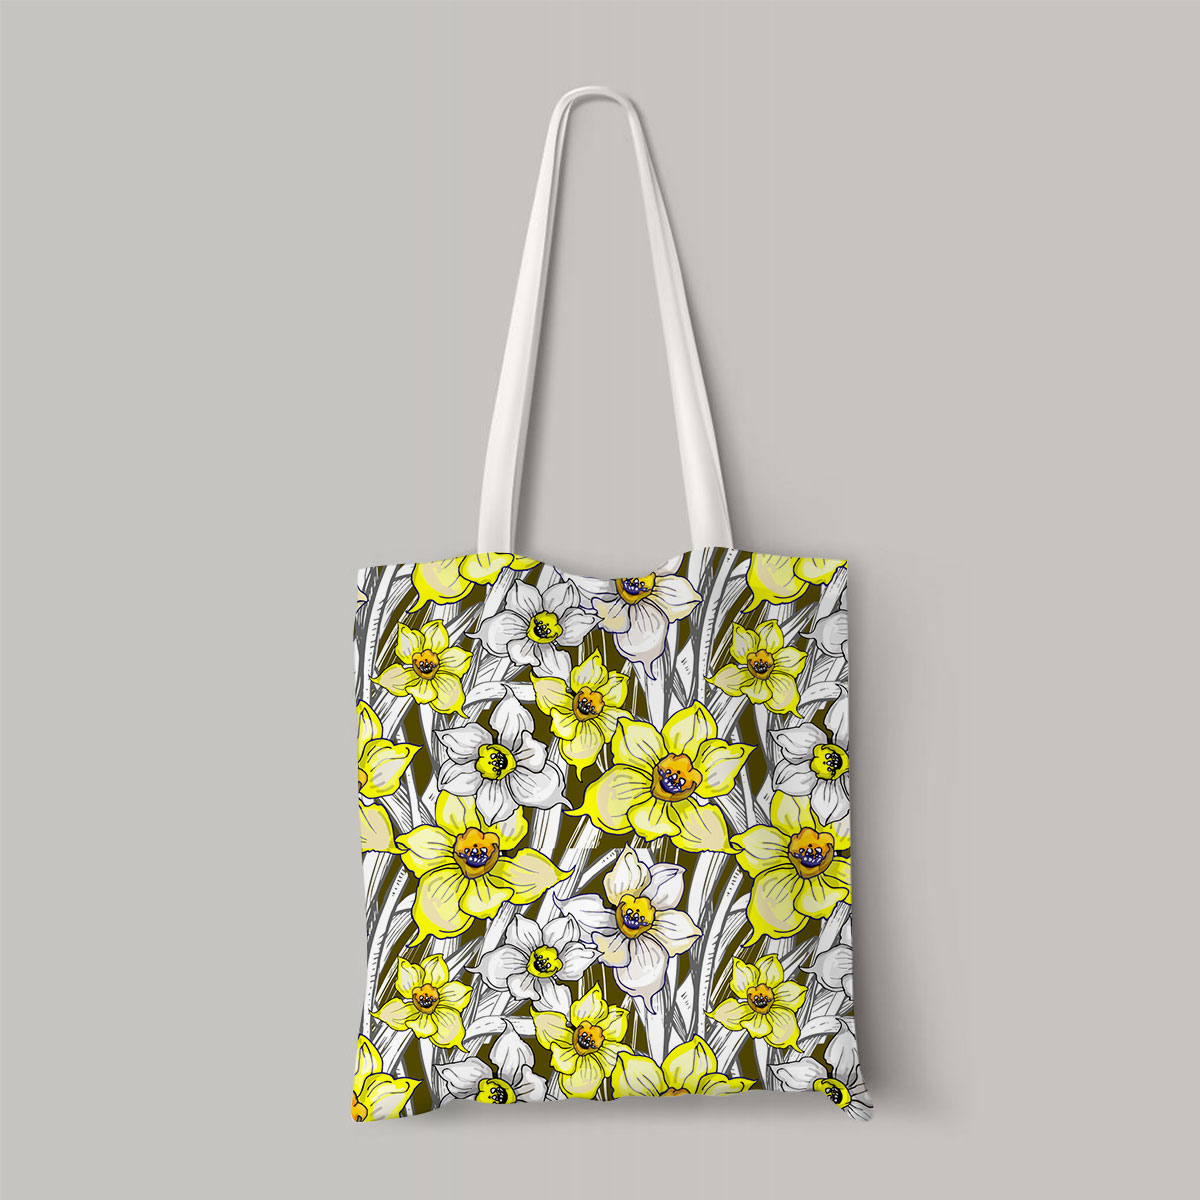 Botanical With Flowers Of Narcissus Daffodil Totebag